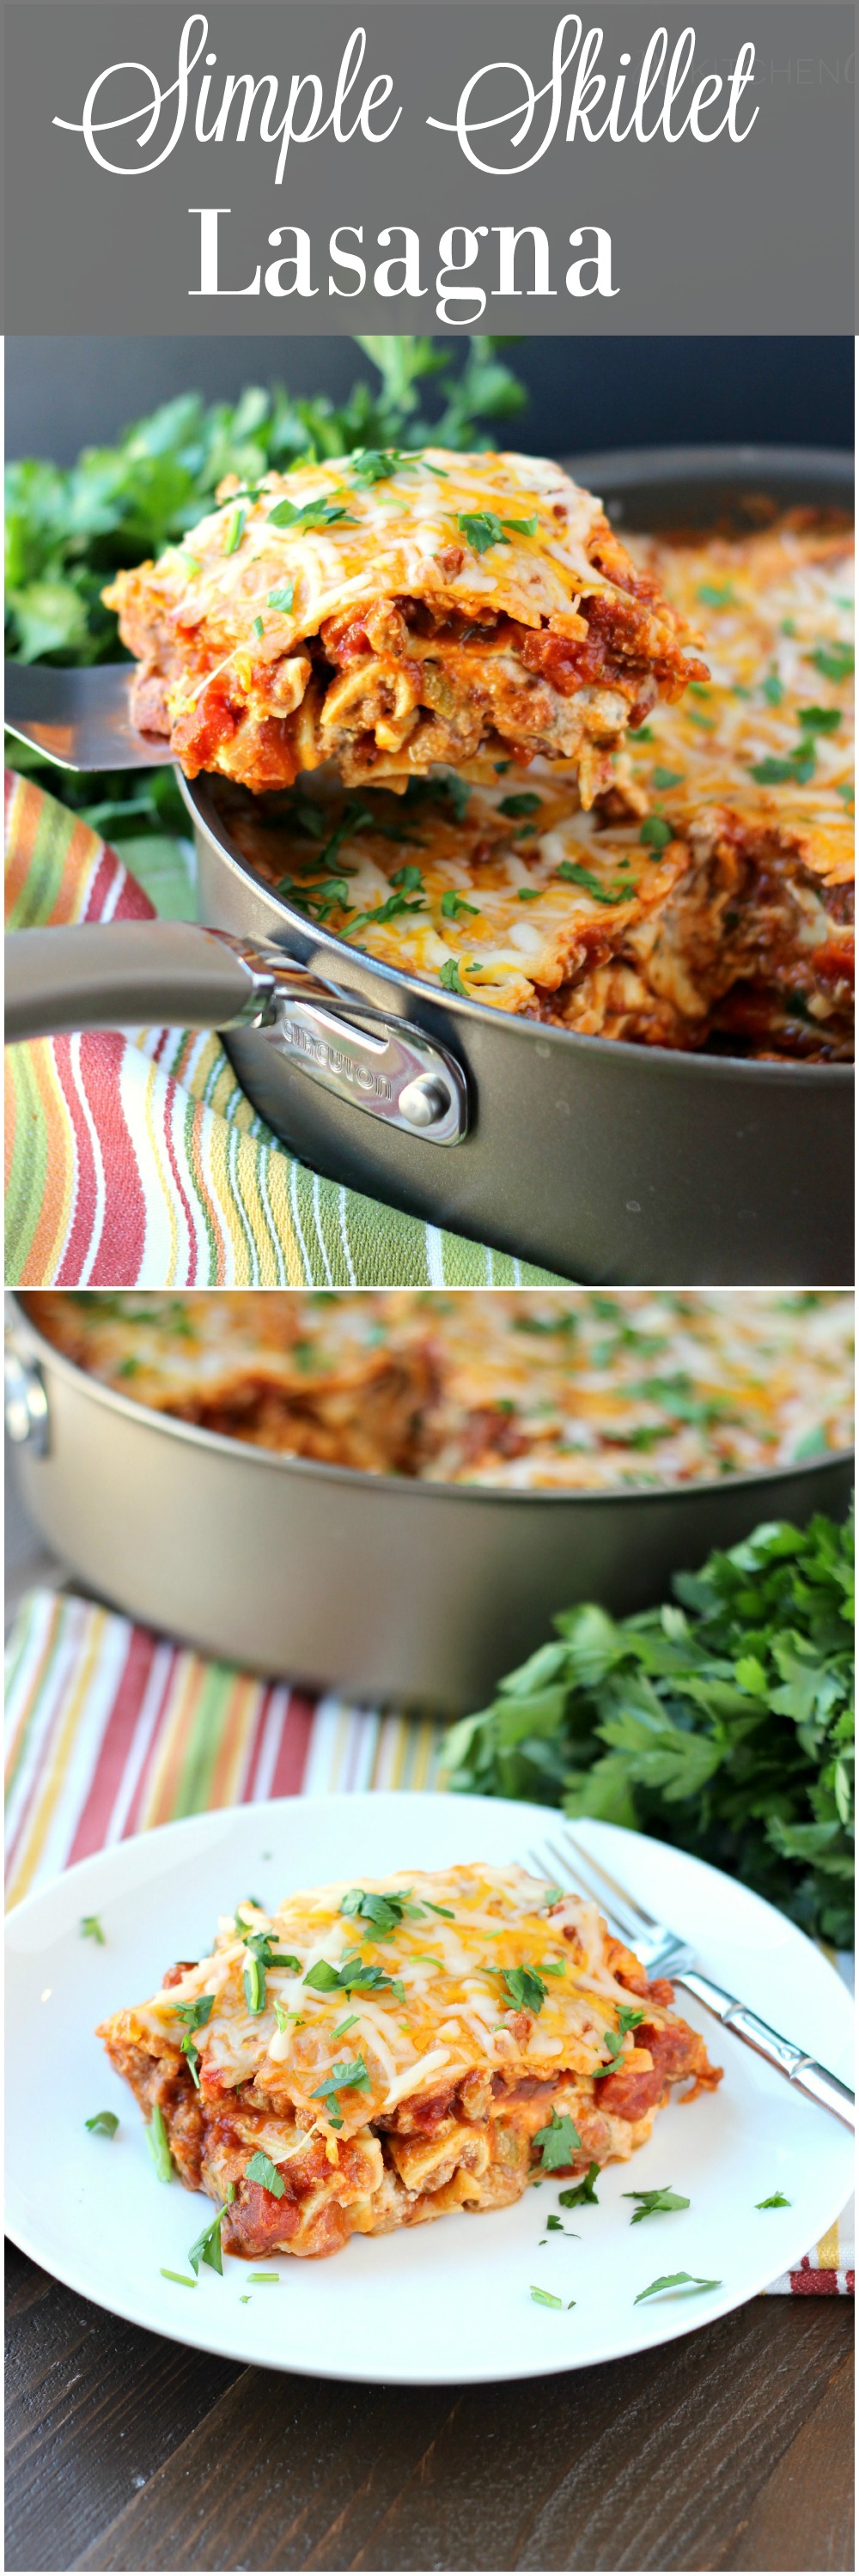 Simple Skillet Lasagna ~ mykitchencraze.com ~ Need an easy meal for dinner tonight? This skillet lasagna will be on your table in no time. Delicious! #NaturallyCheesy #ad